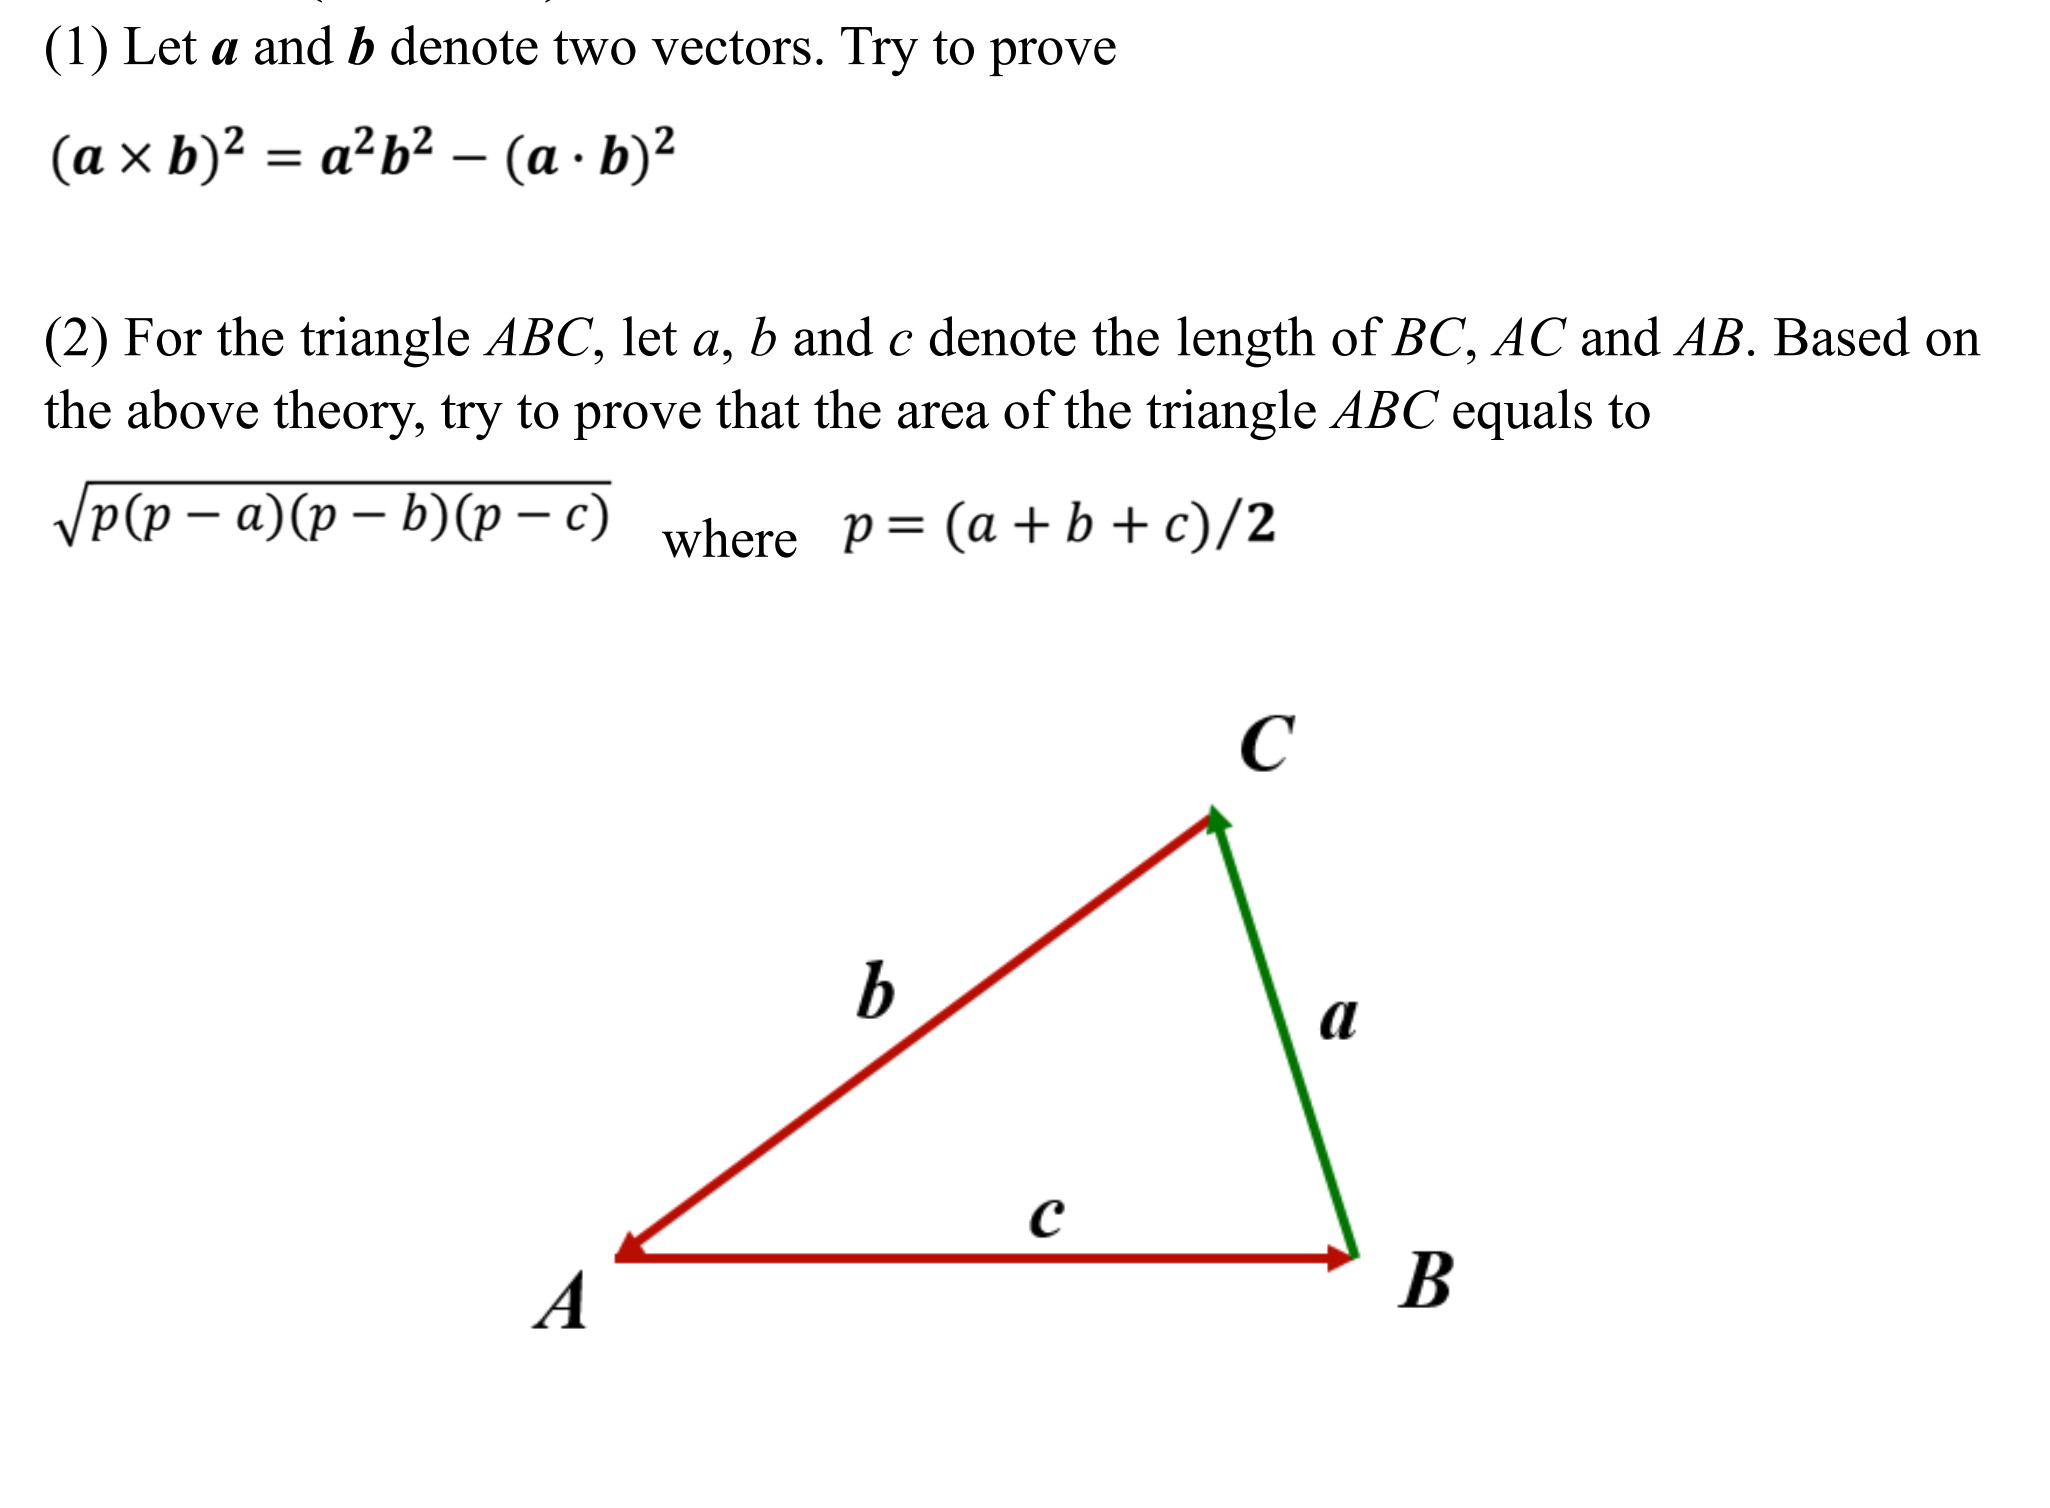 (1) Let a and b denote two vectors. Try to prove
(a x b)²
= a²b² – (a · b)²
(2) For the triangle ABC, let a, b and c denote the length of BC, AC and AB. Based on
the above theory, try to prove that the area of the triangle ABC equals to
VP(p – a)(p – b)(p – c) where p= (a+b+c)/2
B
